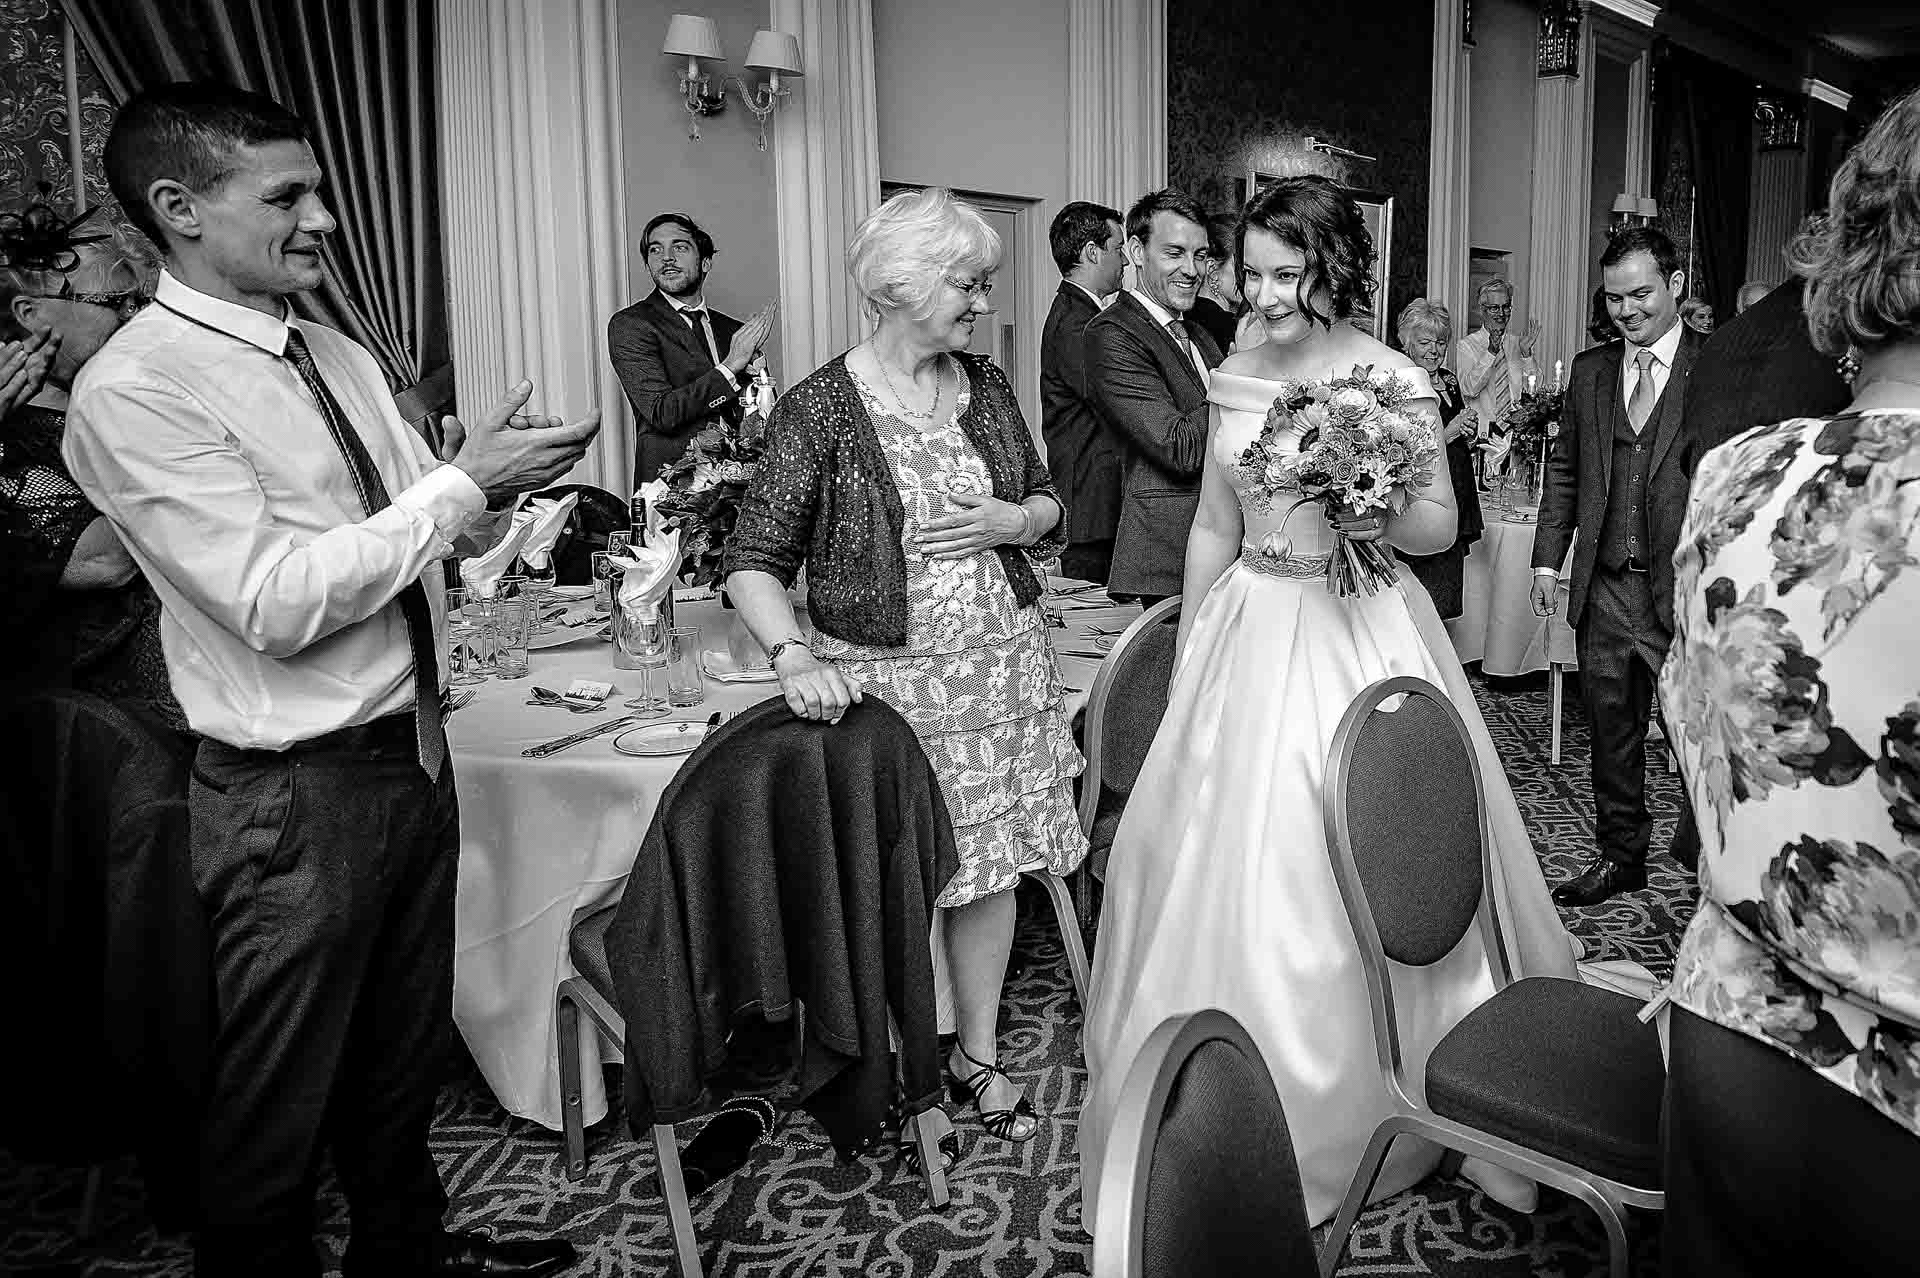 The bride and groom being welcomed by their wedding guests at RAF Club, London